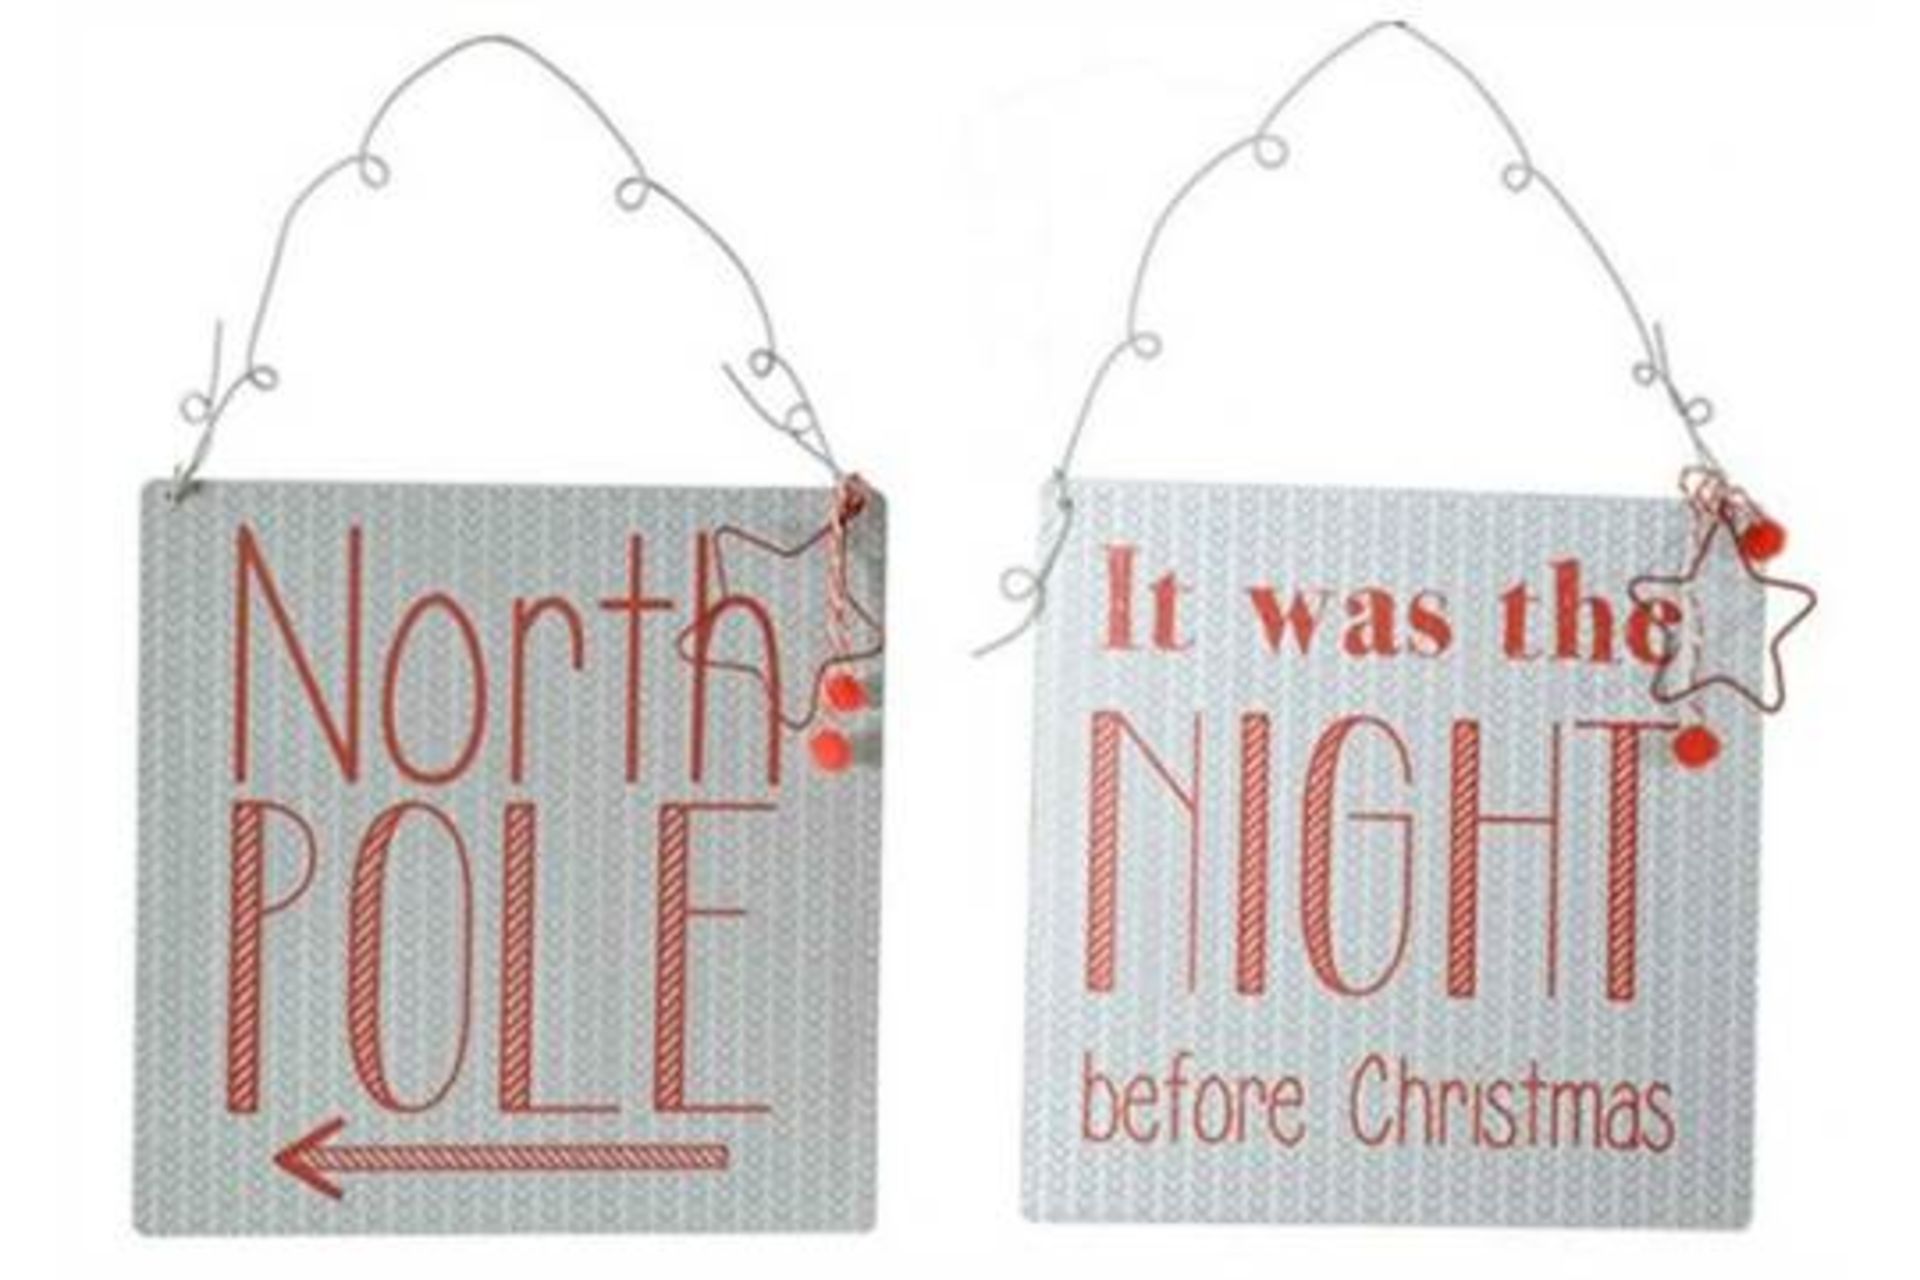 134 X CHRISTMAS WREATHS, NORTH POLE SIGNS, CHRISTMAS COUNTDOWN BOARD, ETC. RRP £ 843.30 - Image 5 of 6